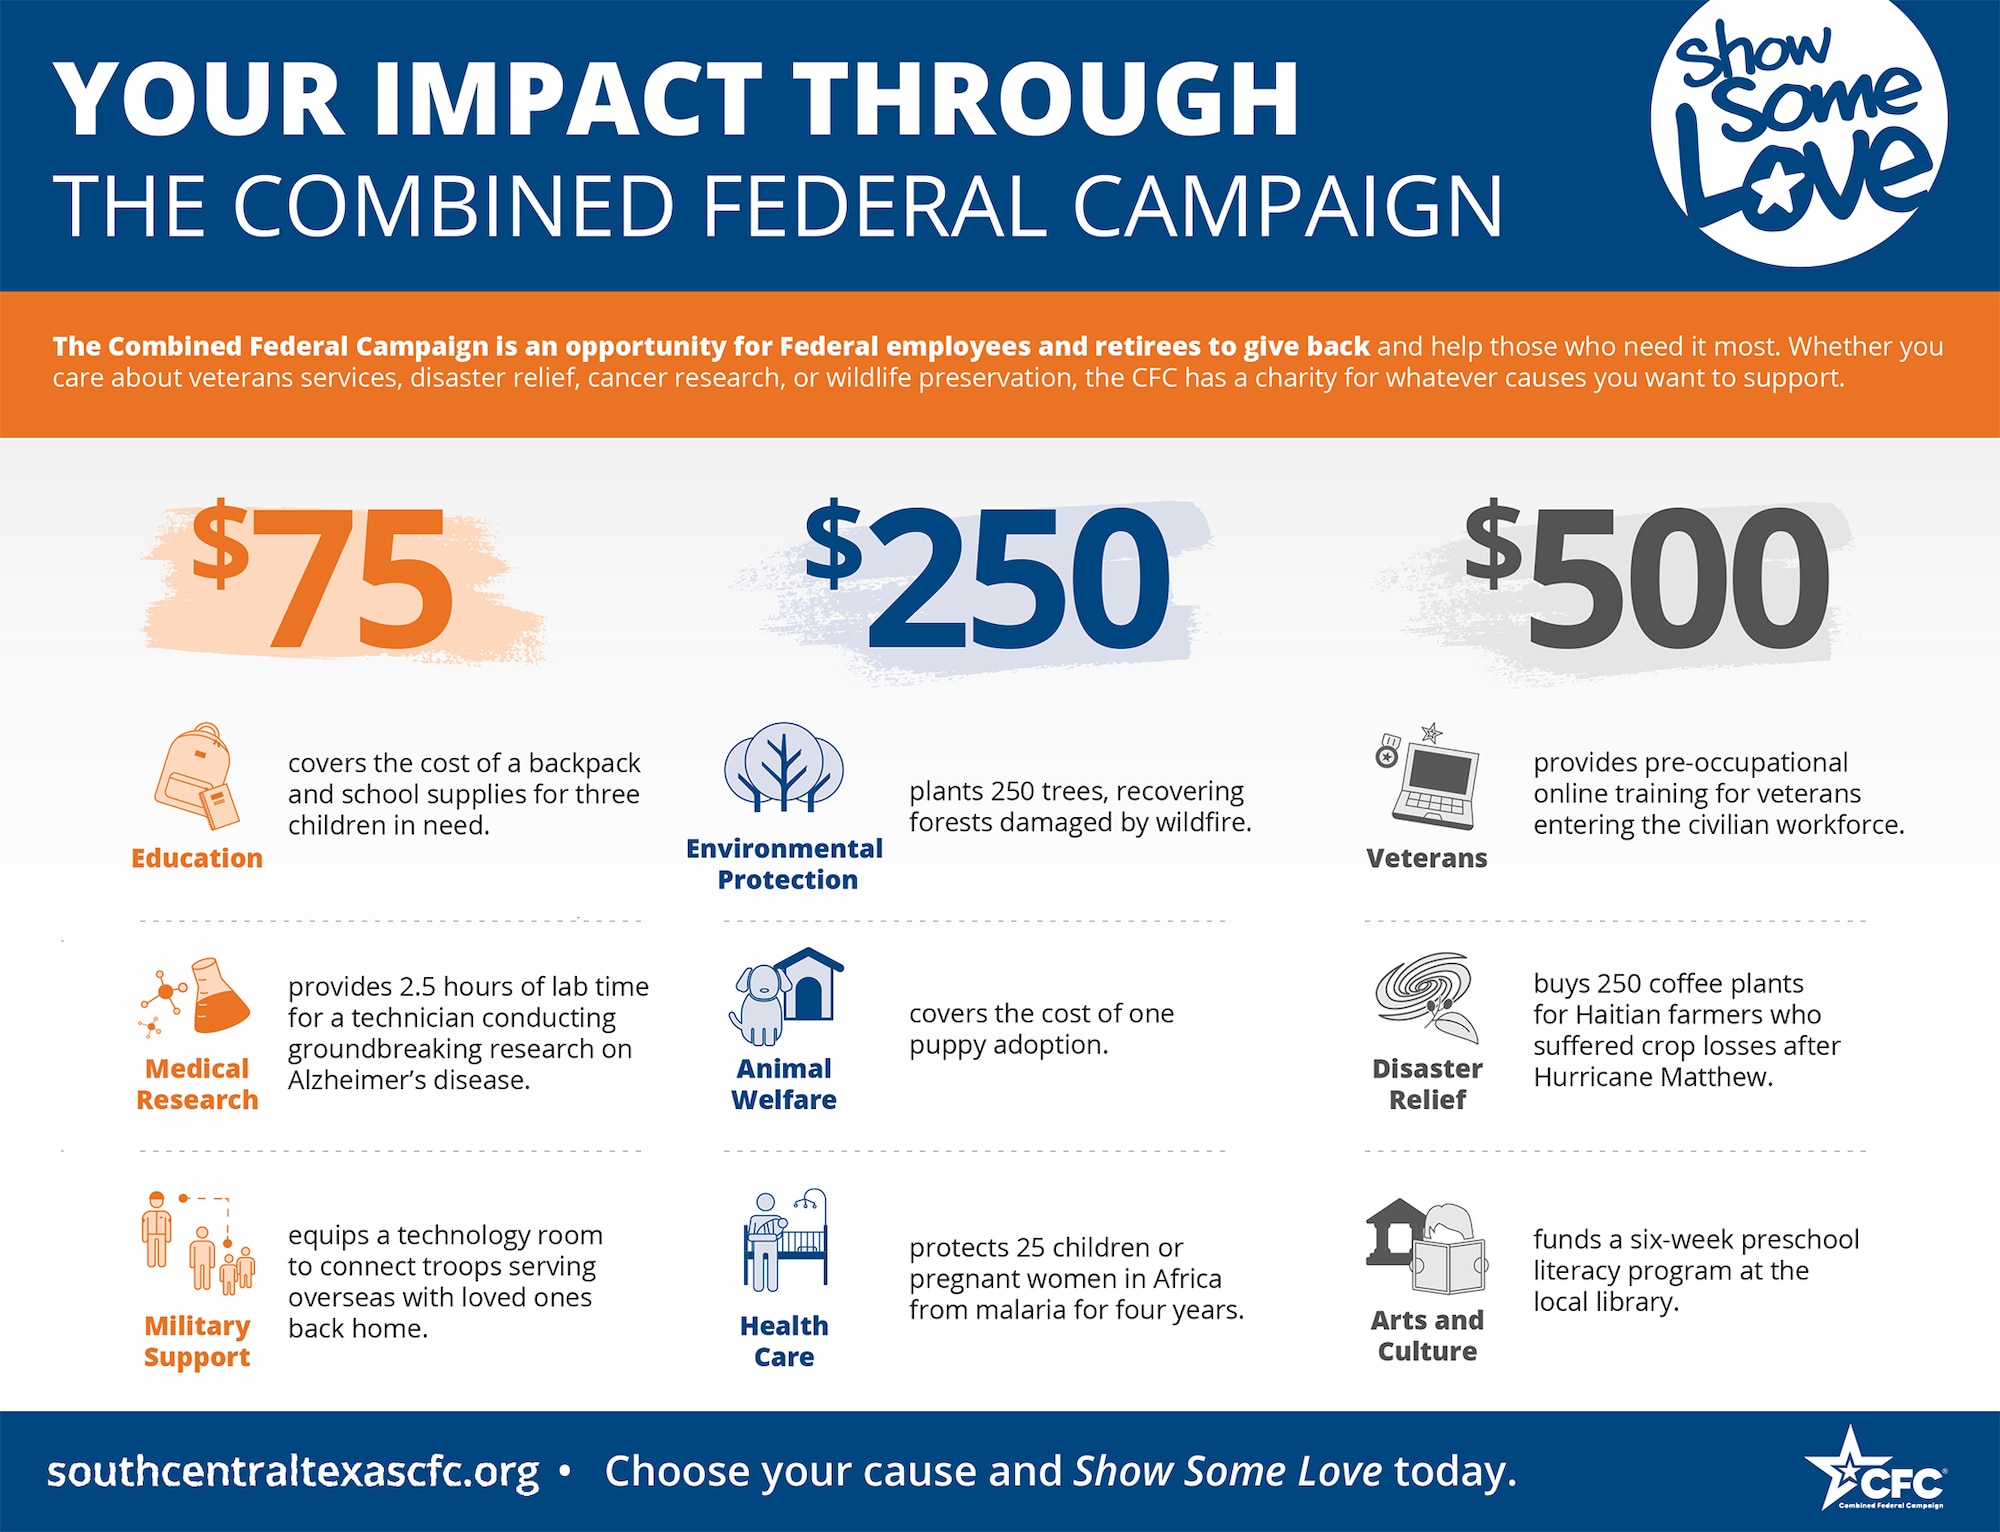 There have been changes for the 2017 Combined Federal Campaign, but the mission remains the same: to promote and support philanthropy through a program that is employee focused, cost-efficient, and effective in providing all Federal employees the opportunity to improve the quality of life for all.